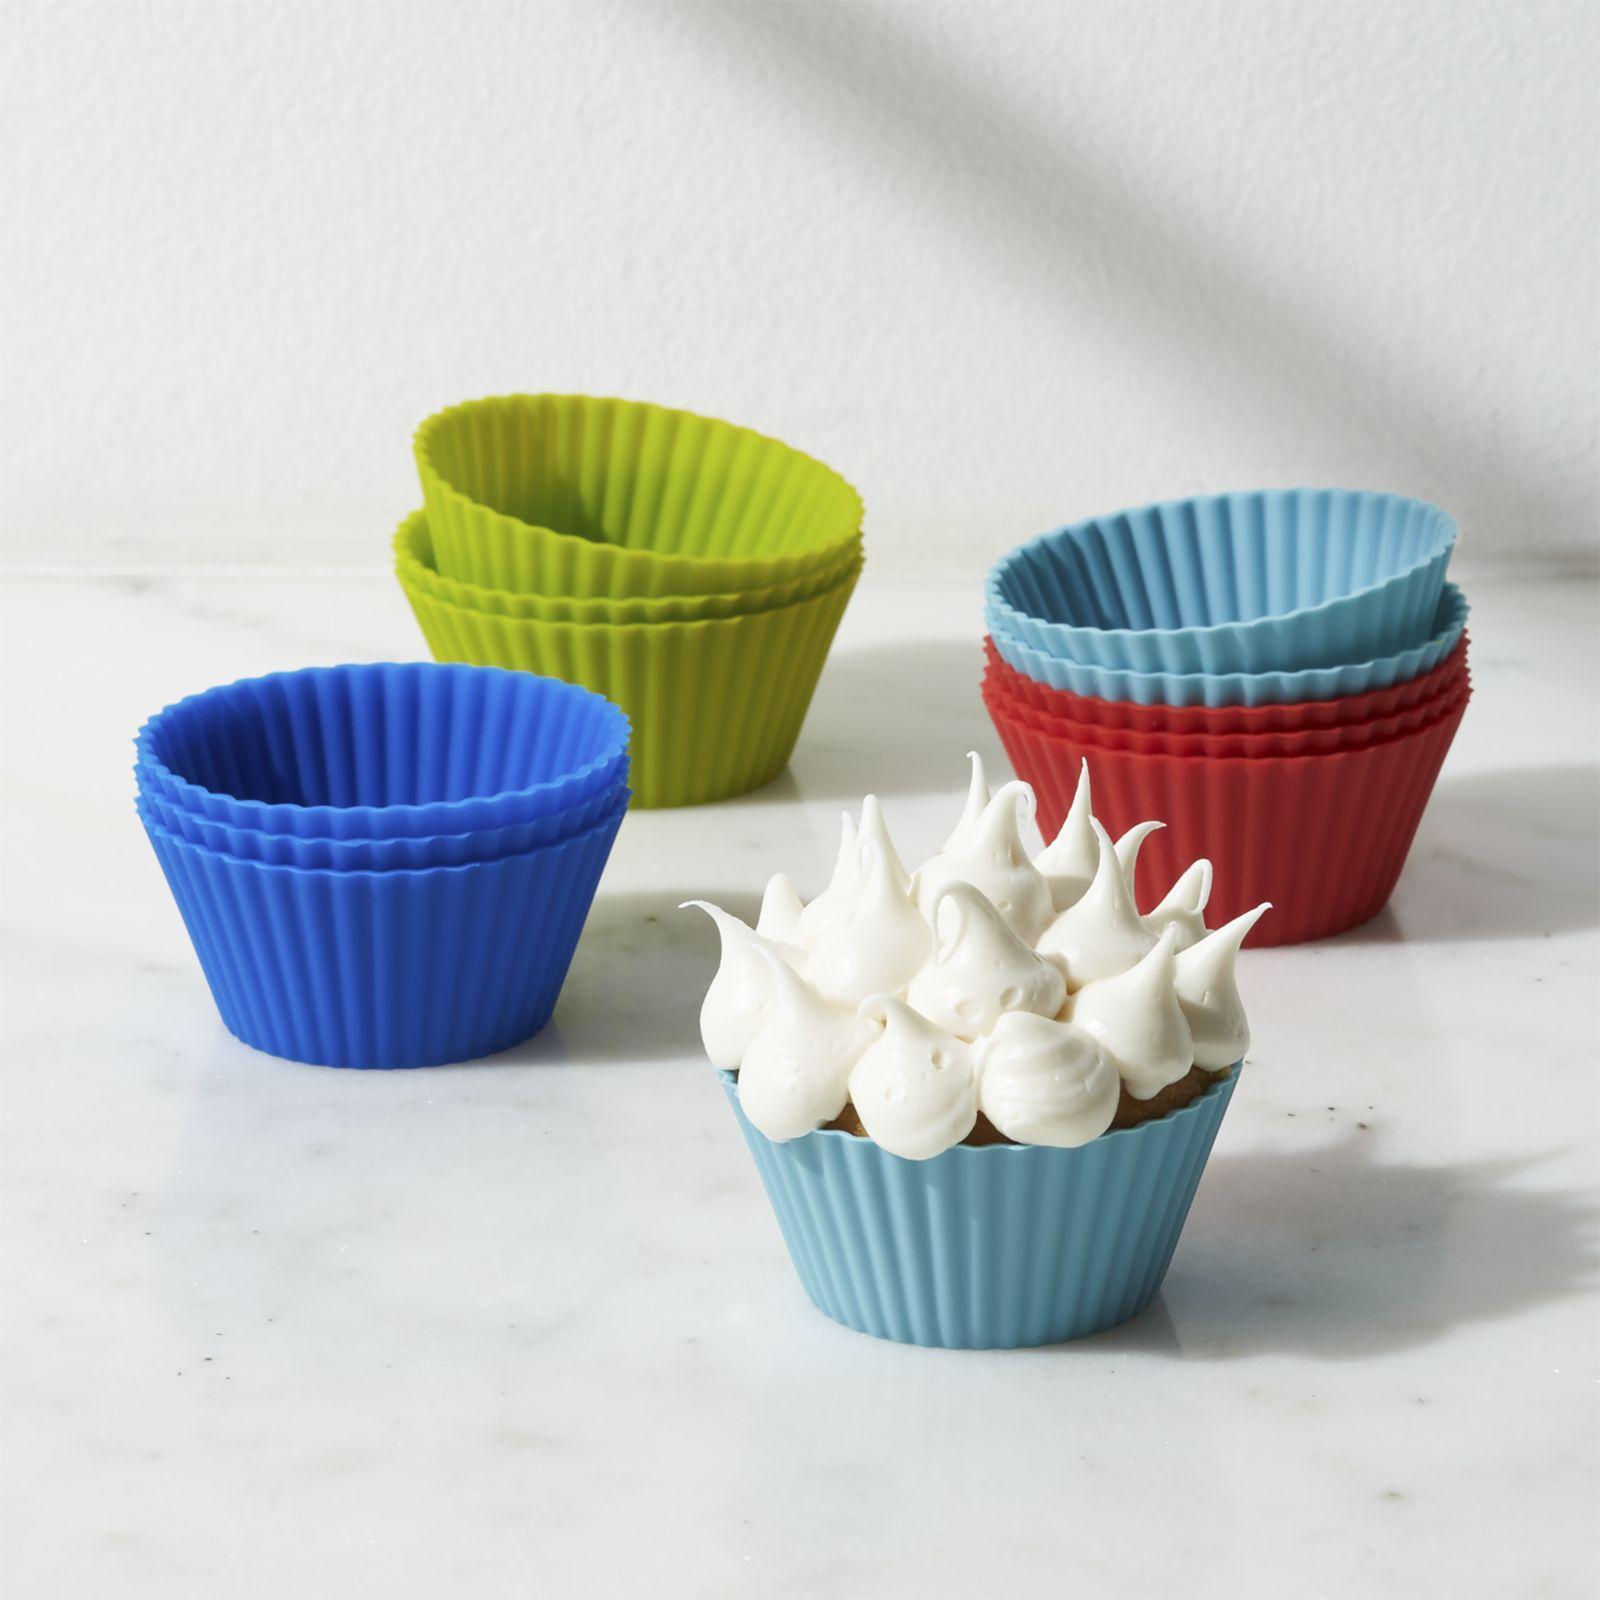 Silicone Cupcake Baking Cups Liners, 12 Pack, Blue/White/Red